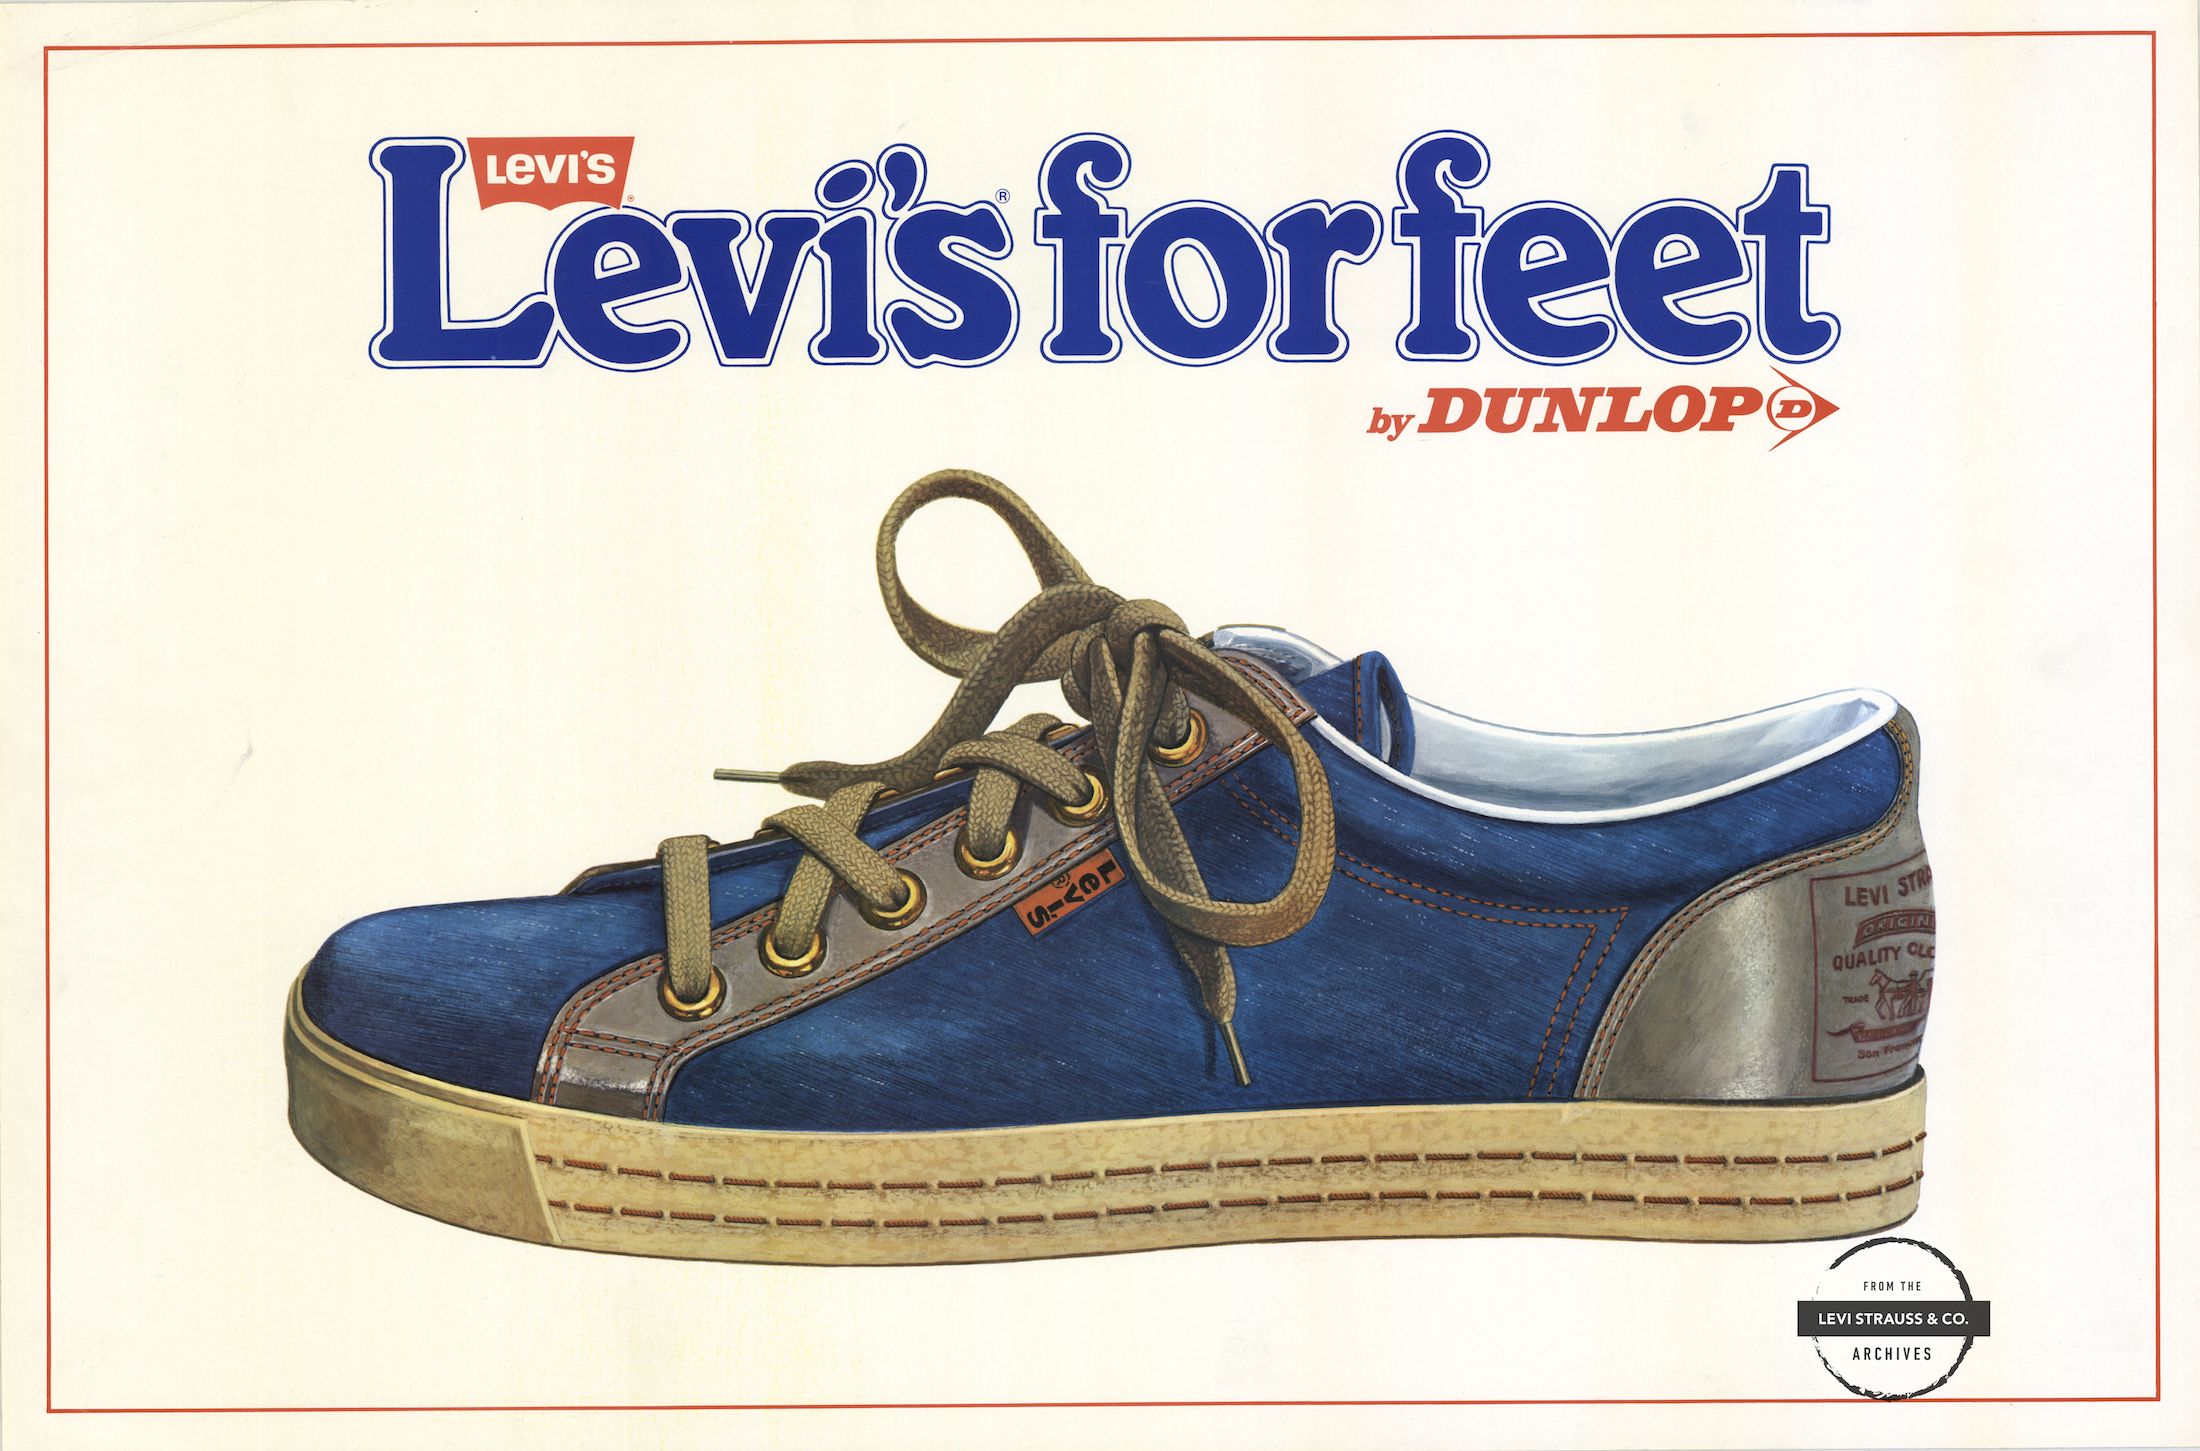 Levi's for Feet ad